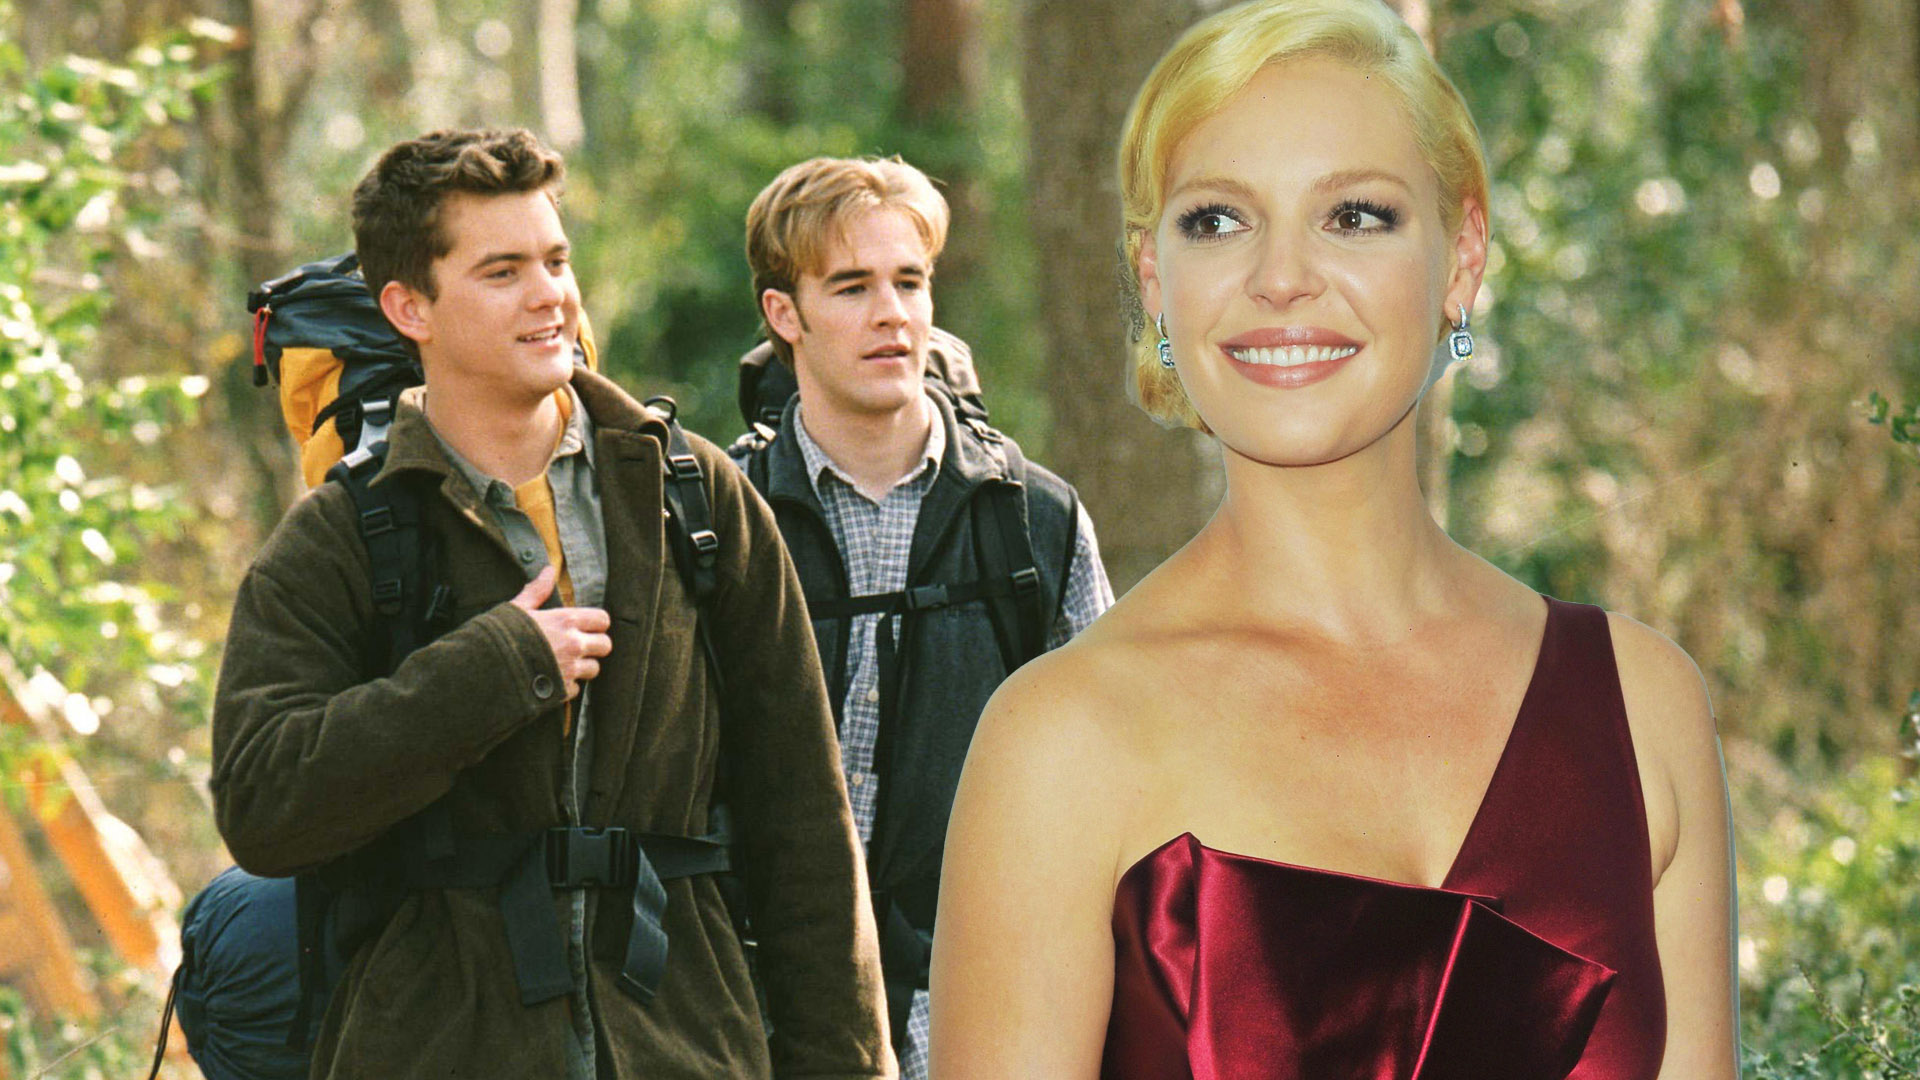 Ultimate 'What If': Katherine Heigl Almost Landed a Lead Role on Dawson's Creek